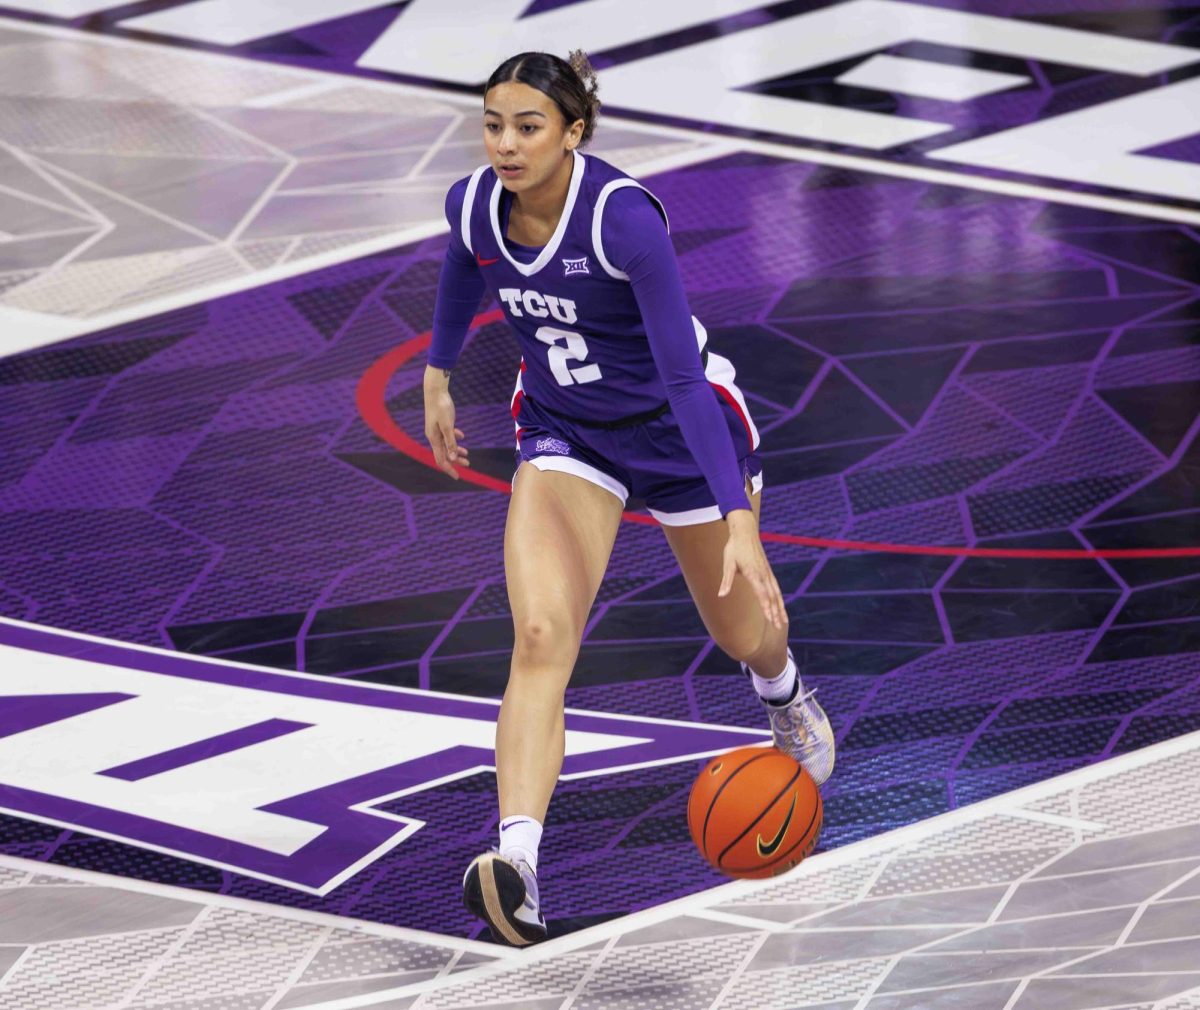 TCU guard Tara dribbles up the court at Ed and Rae Schollmaier Arena in Fort Worth, Texas on February 28th, 2024. The TCU Horned Frogs beat the Texas Tech Lady Raiders 73-52. (TCU360/ Tyler Chan)